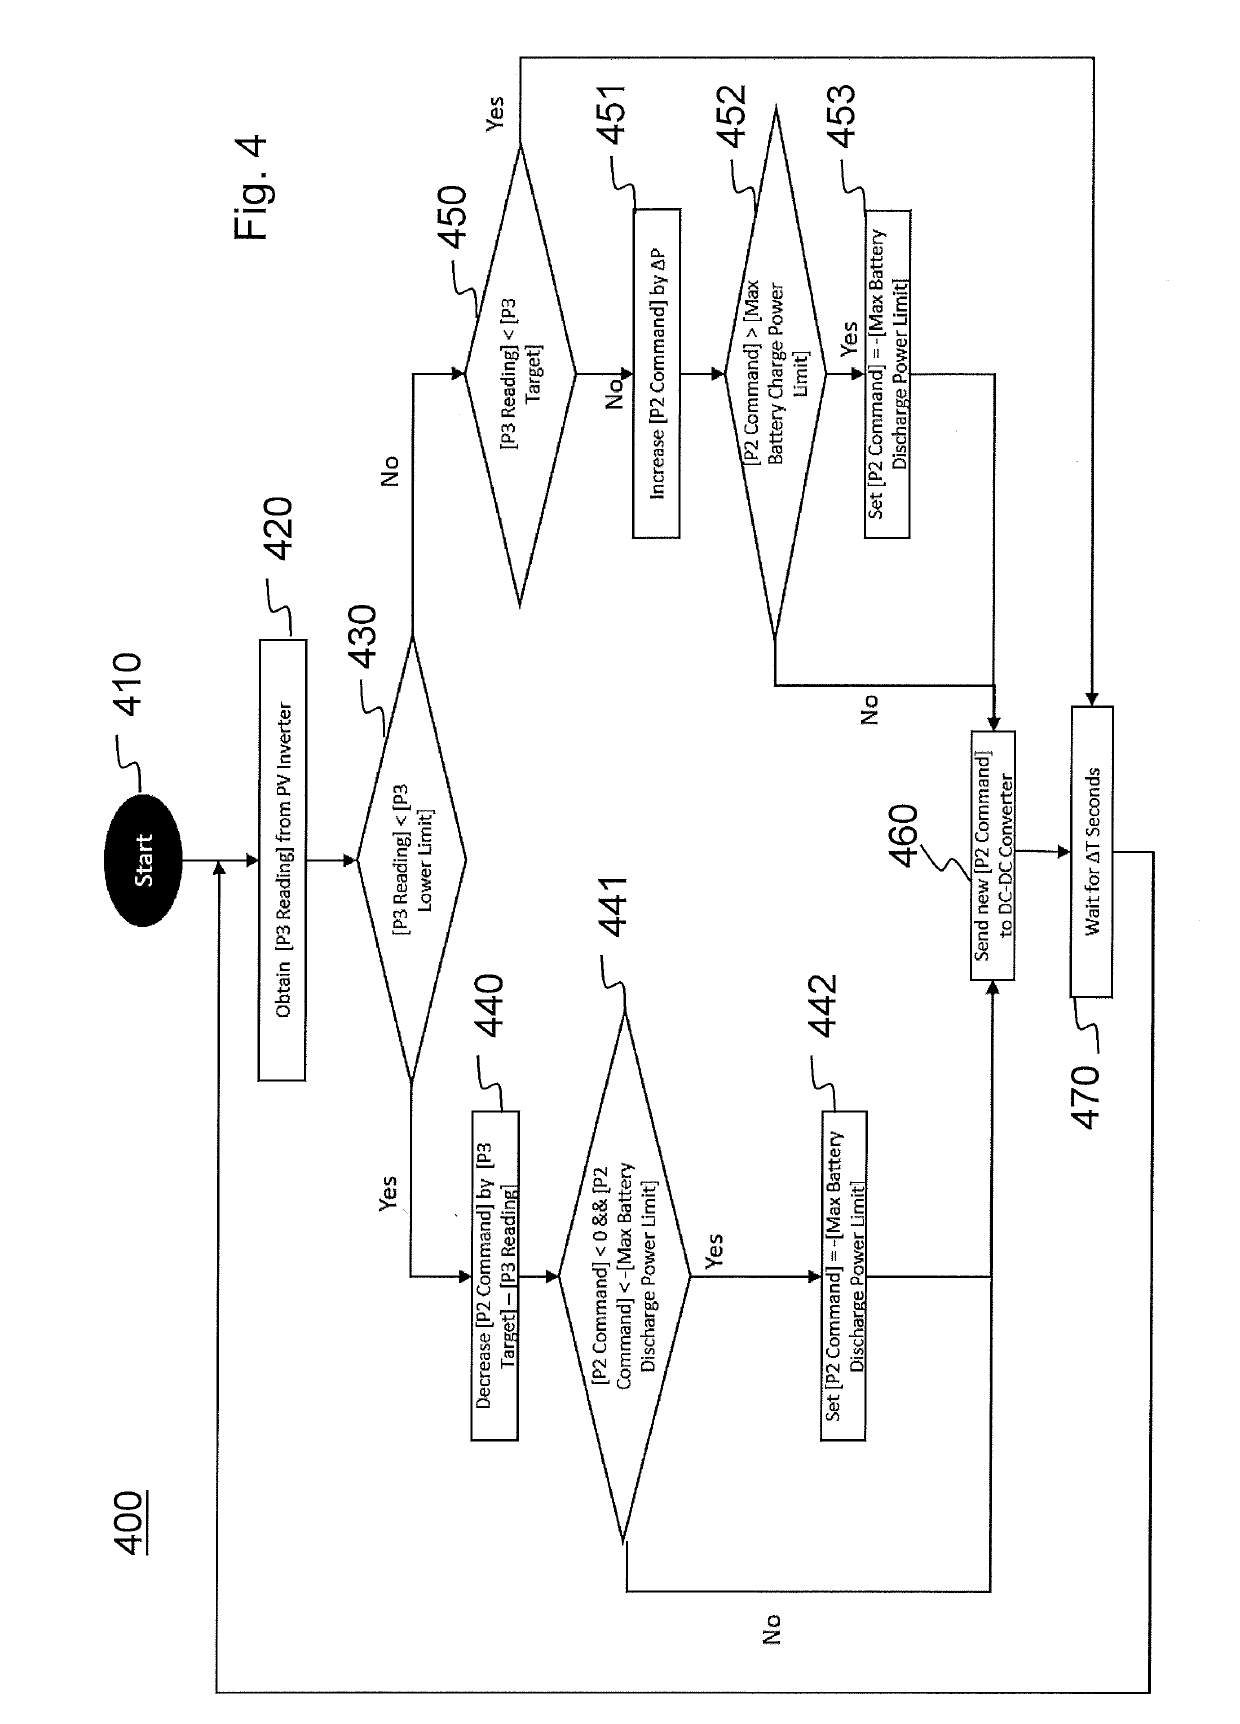 Apparatus, device and computer implemented method for controlling power plant system